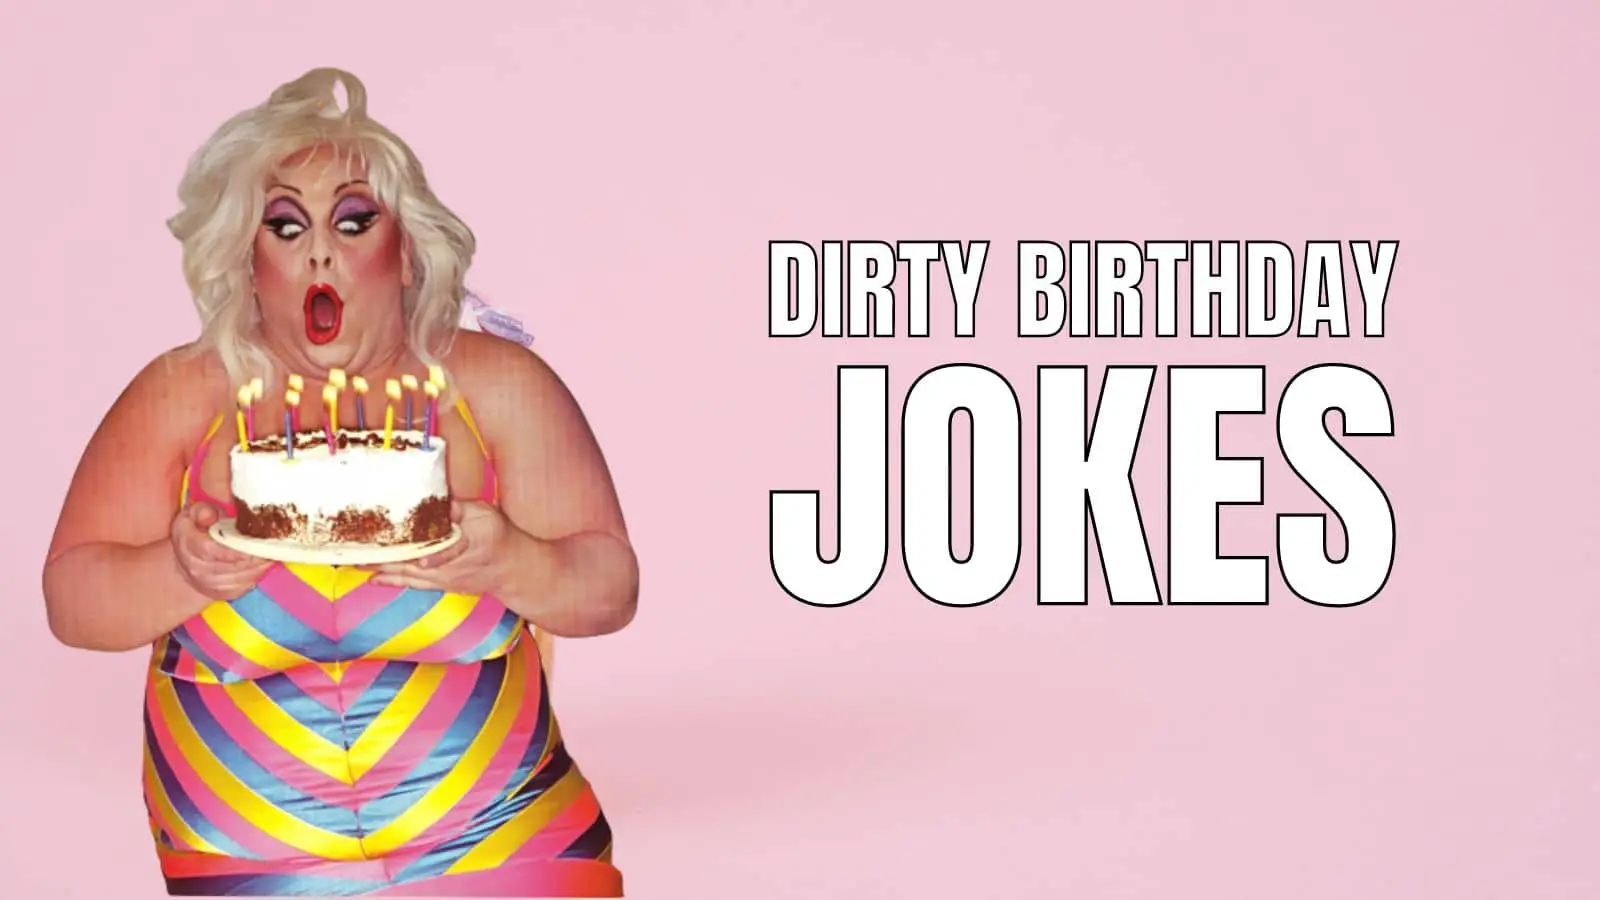 Dirty Birthday Jokes for Adults